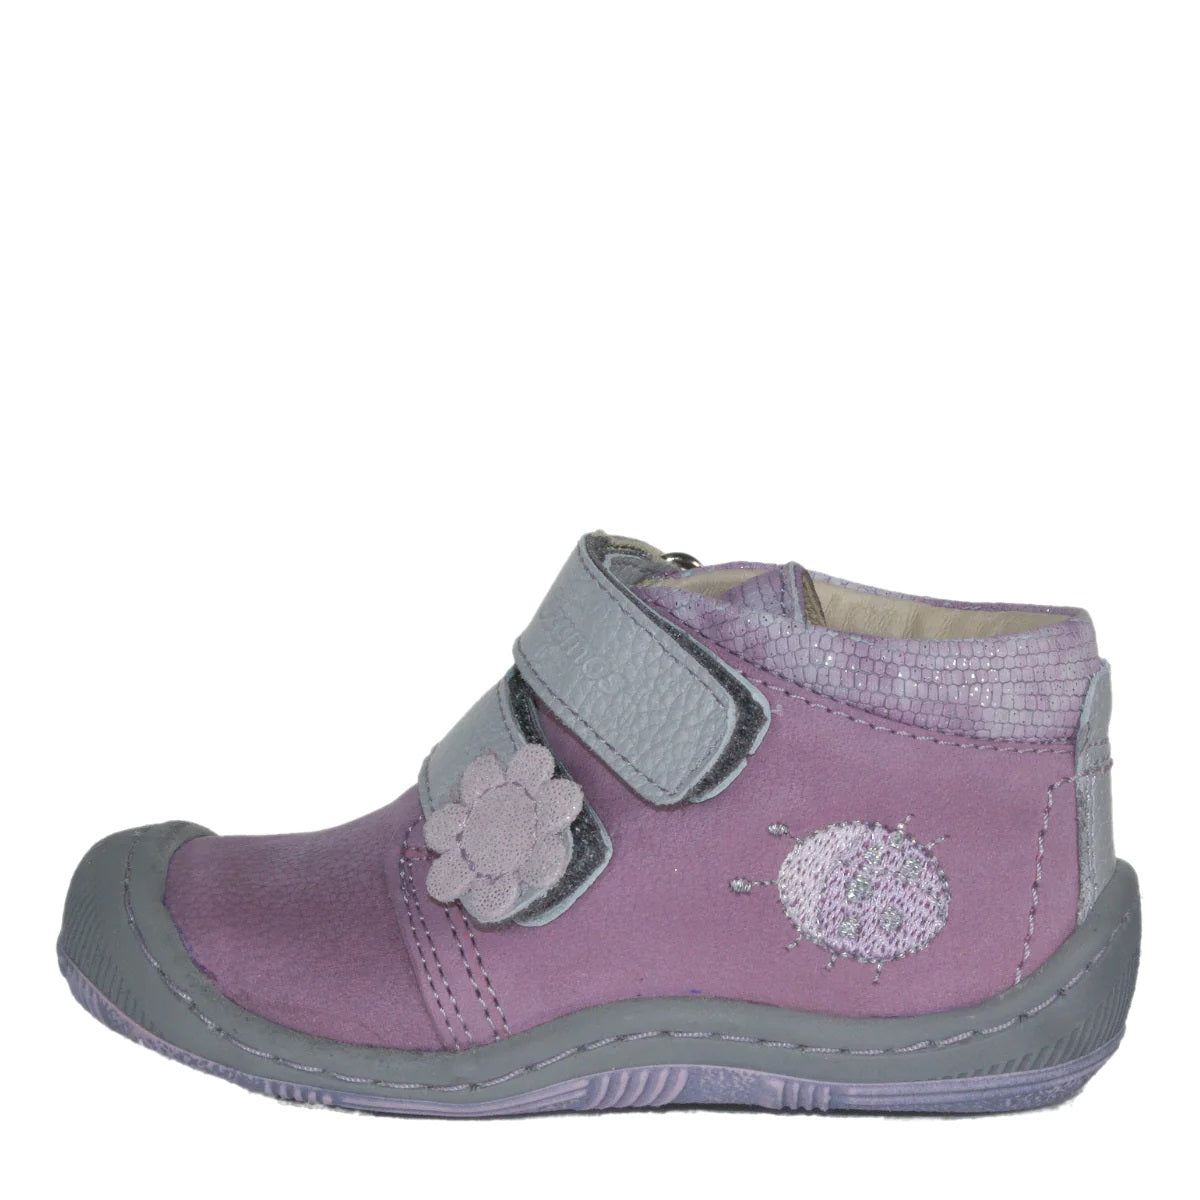 Szamos kid girl sneakers pale purple with ladybug and flower decor and double velcro straps toddler size - TinyShoes